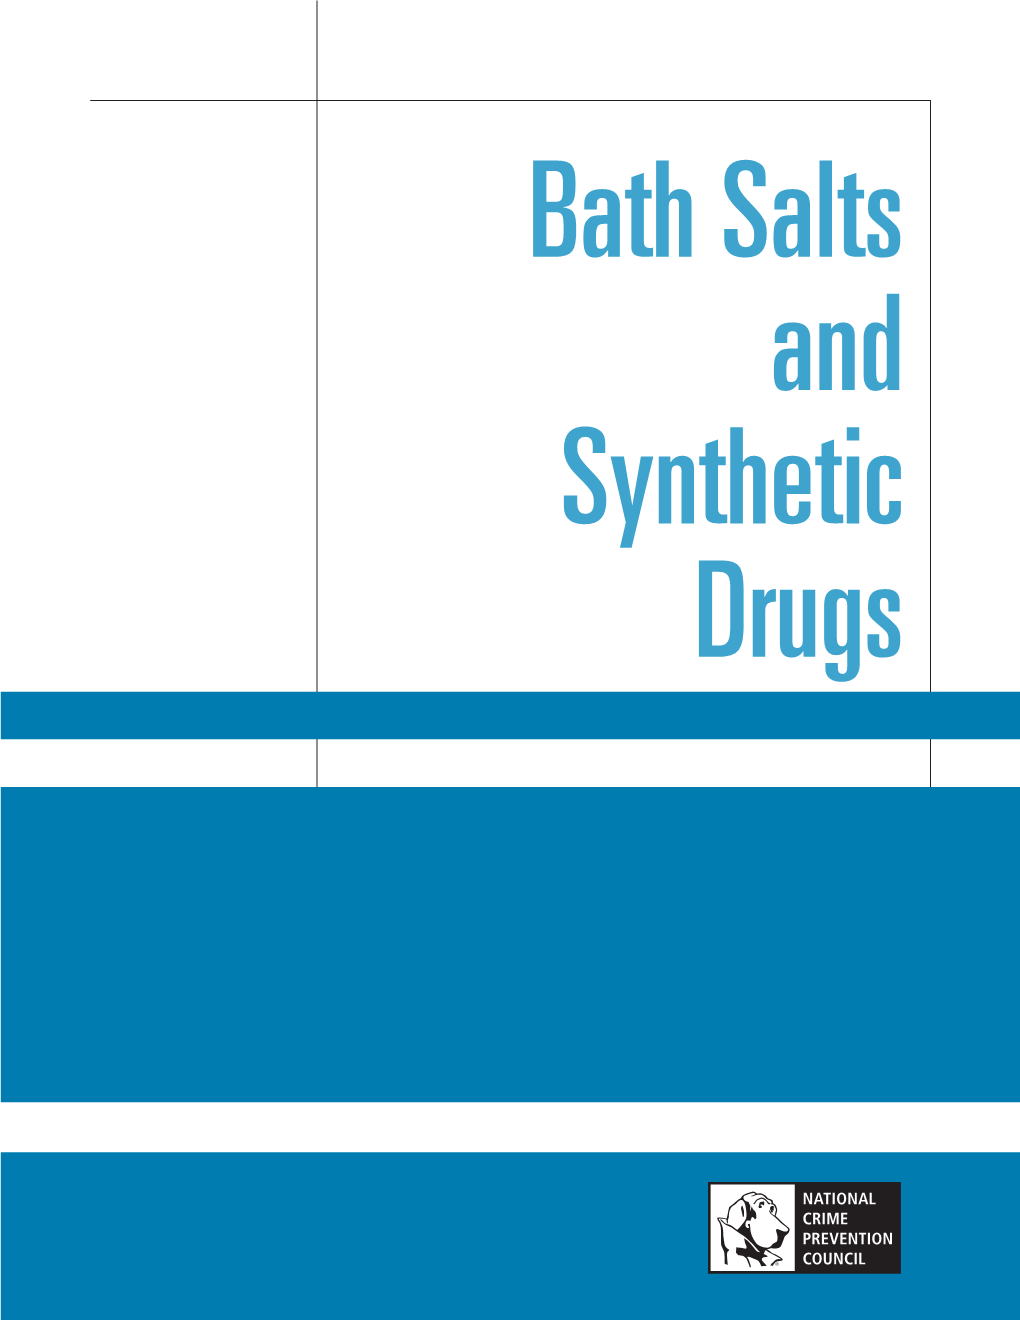 Bath Salts and Synthetic Drugs Fact Sheet